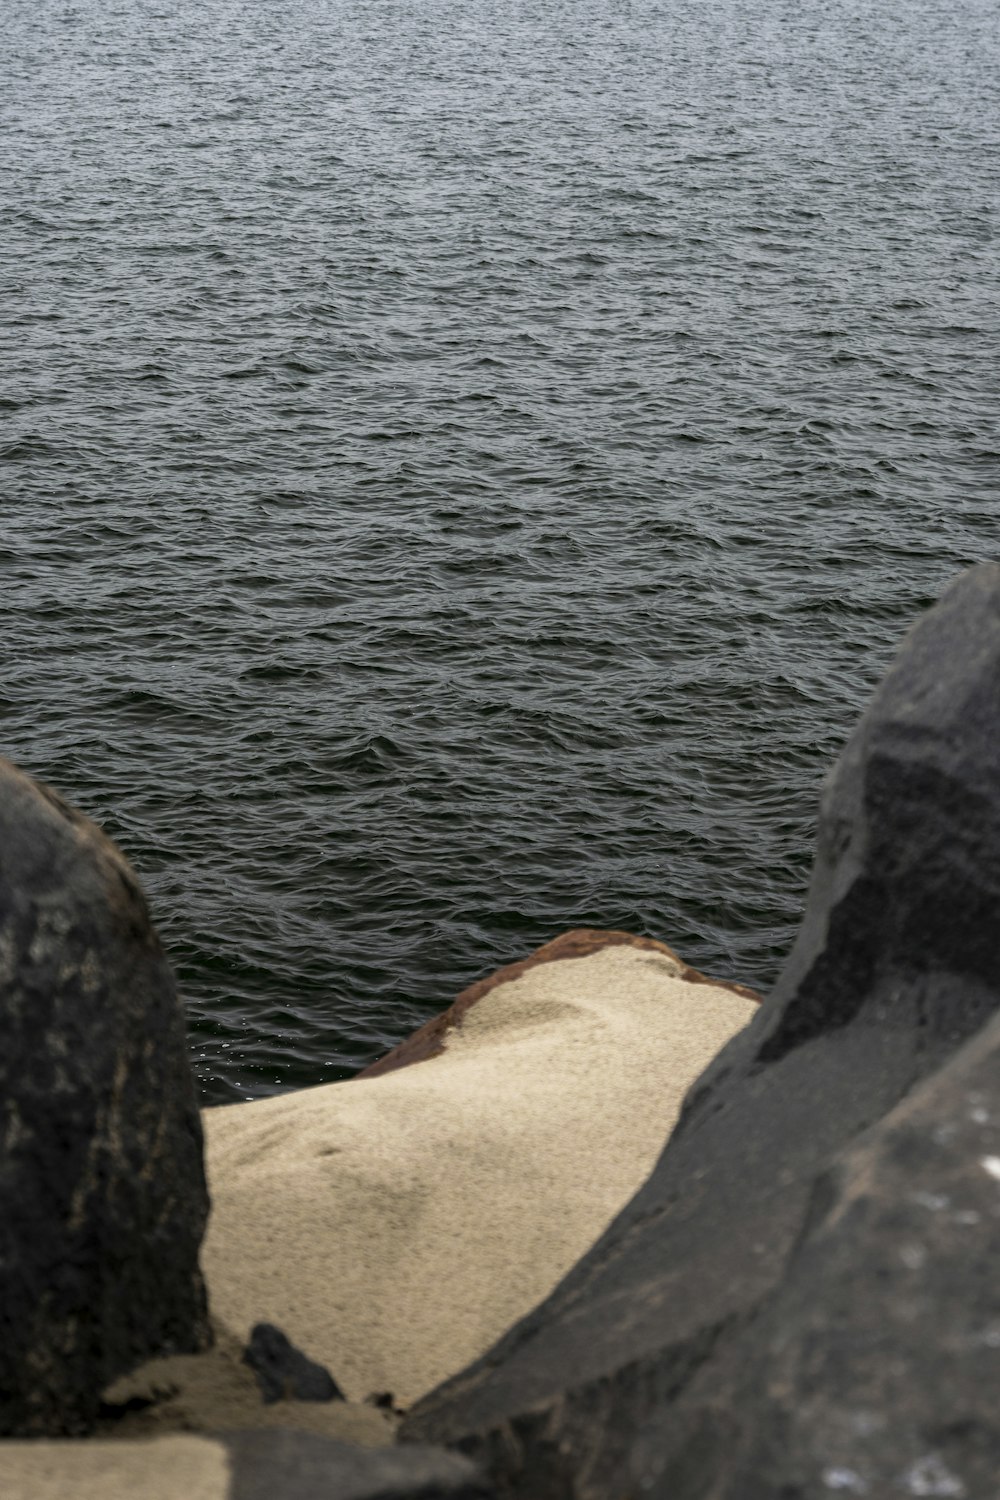 a bird is sitting on a rock near the water